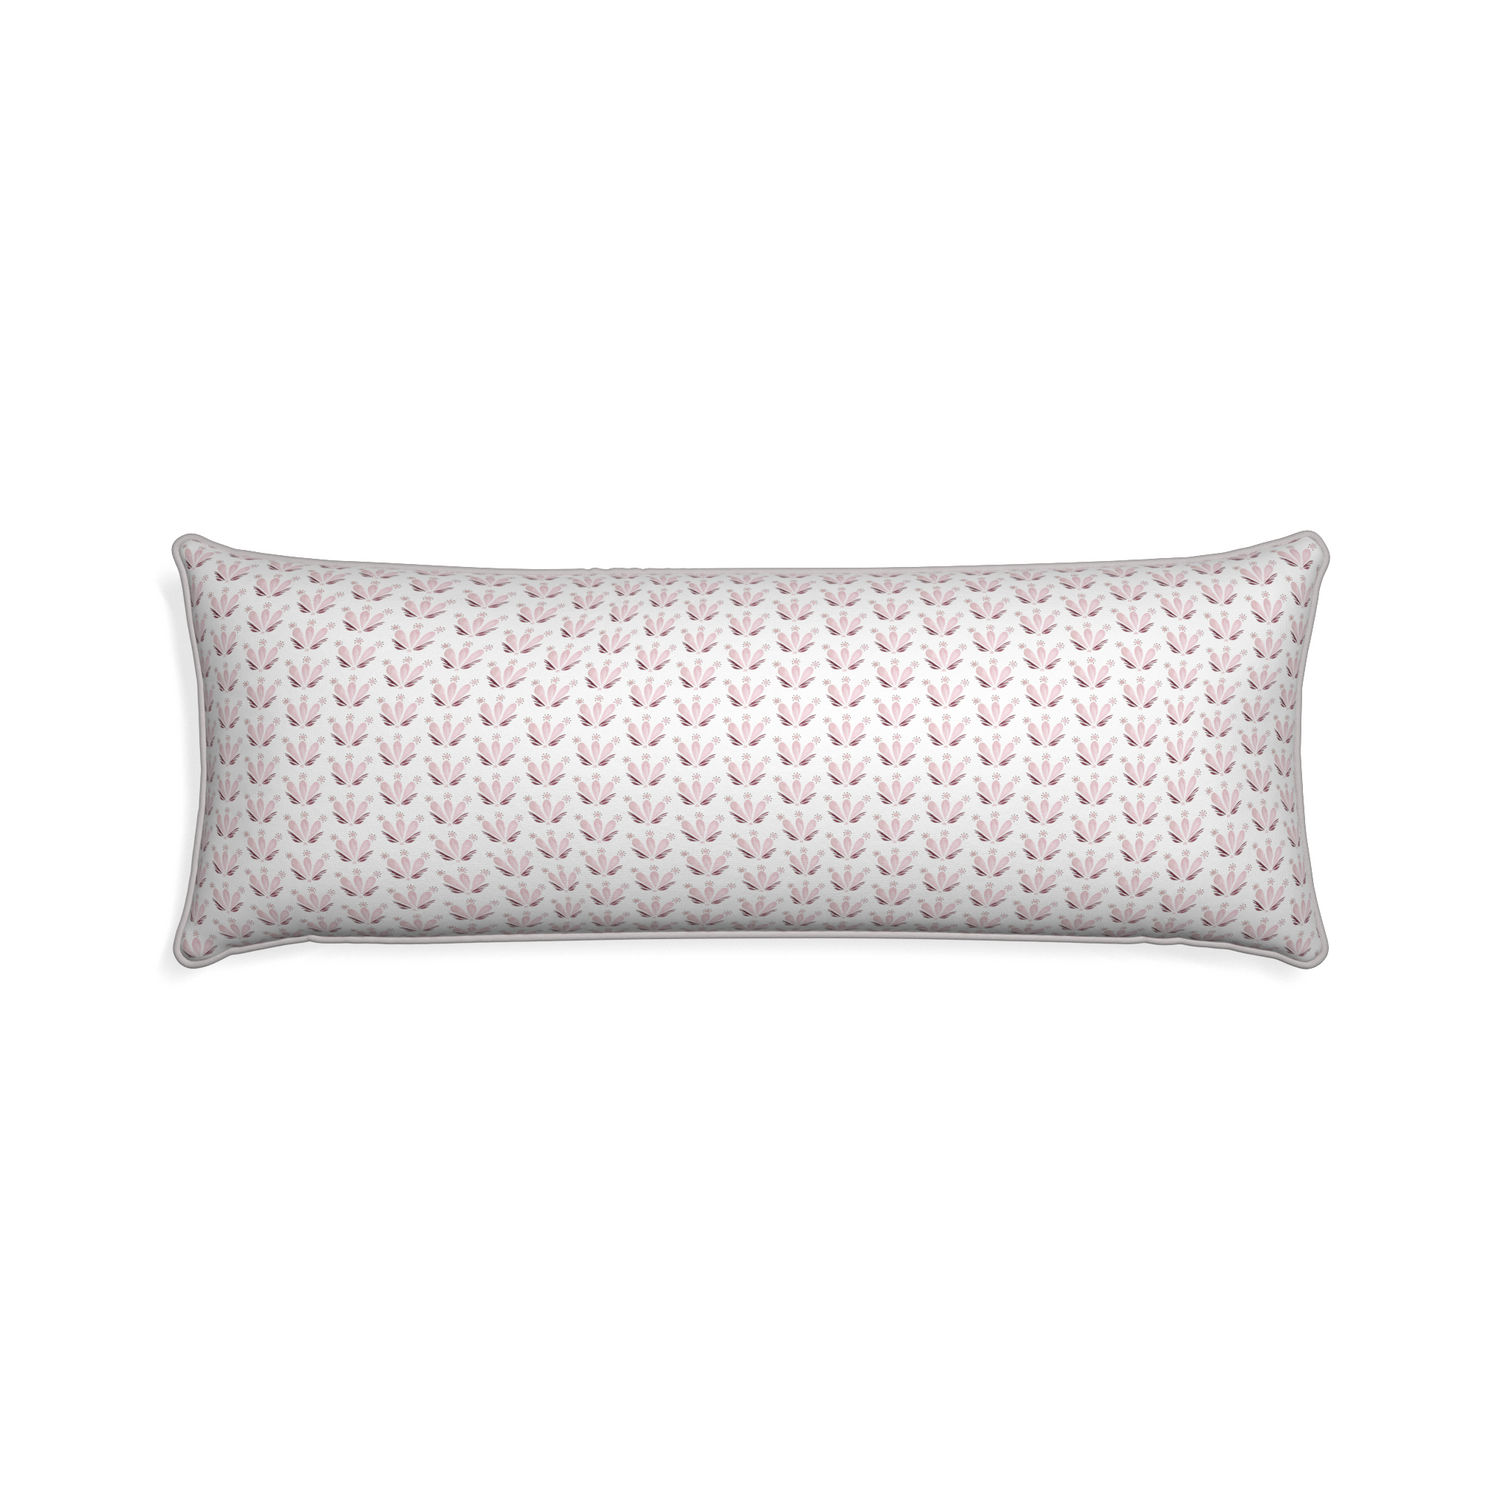 Xl-lumbar serena pink custom pillow with pebble piping on white background